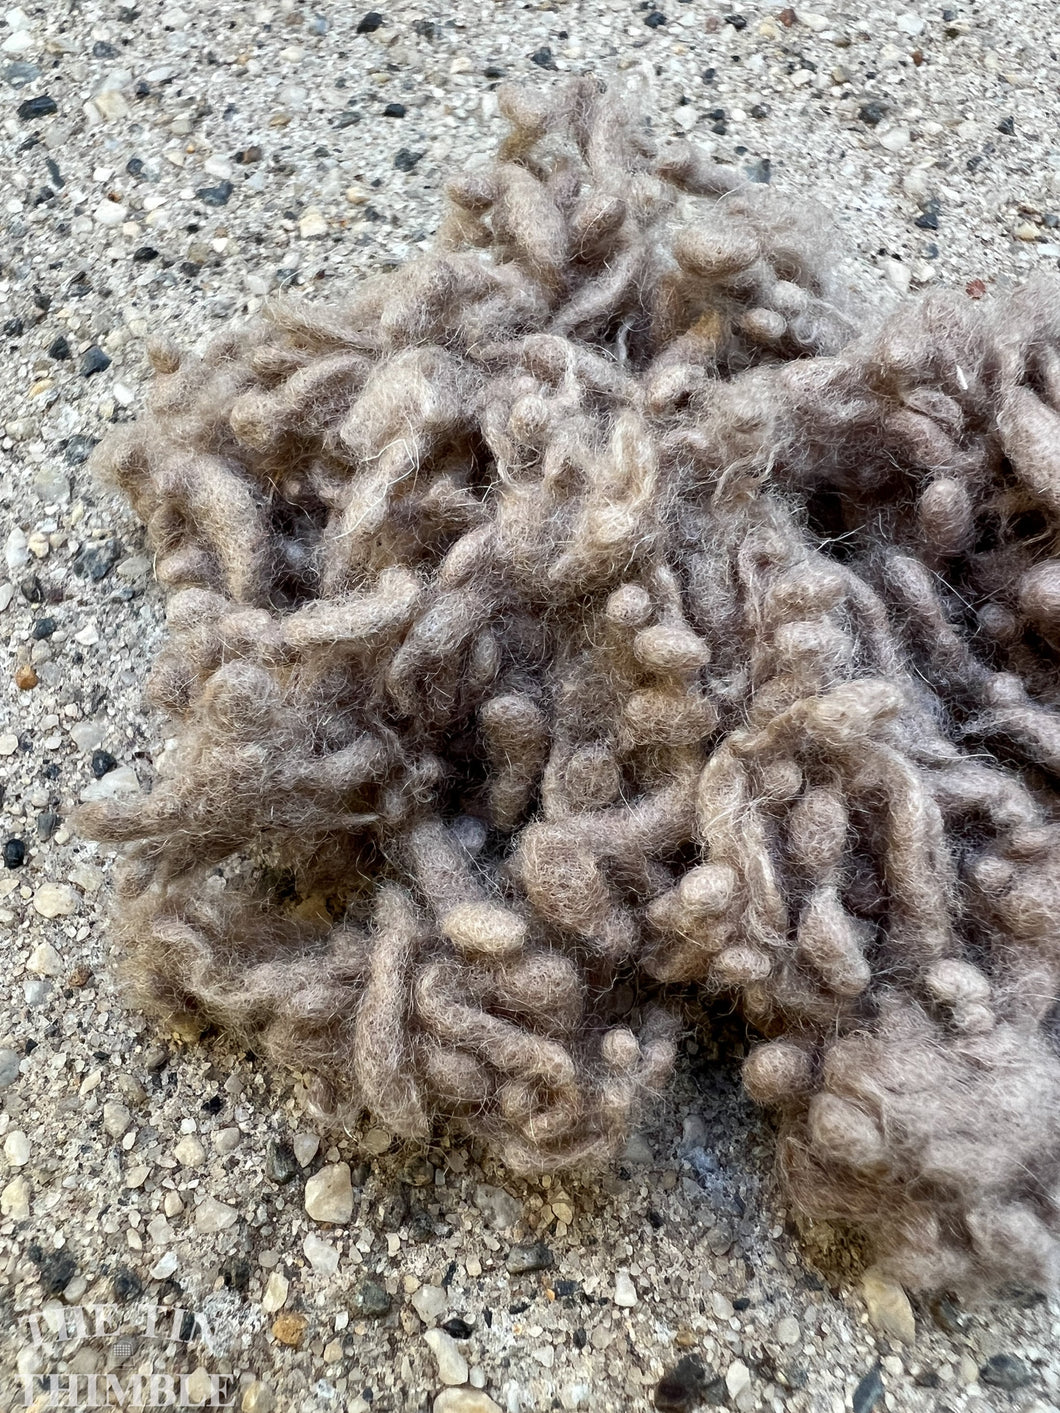 Earth Brown/Taupe Wool Nepps or Nibs for Felting by DHG / 1/8 Oz or More / Commercially Dyed Textural Fibers for Nuno or Wet Felting